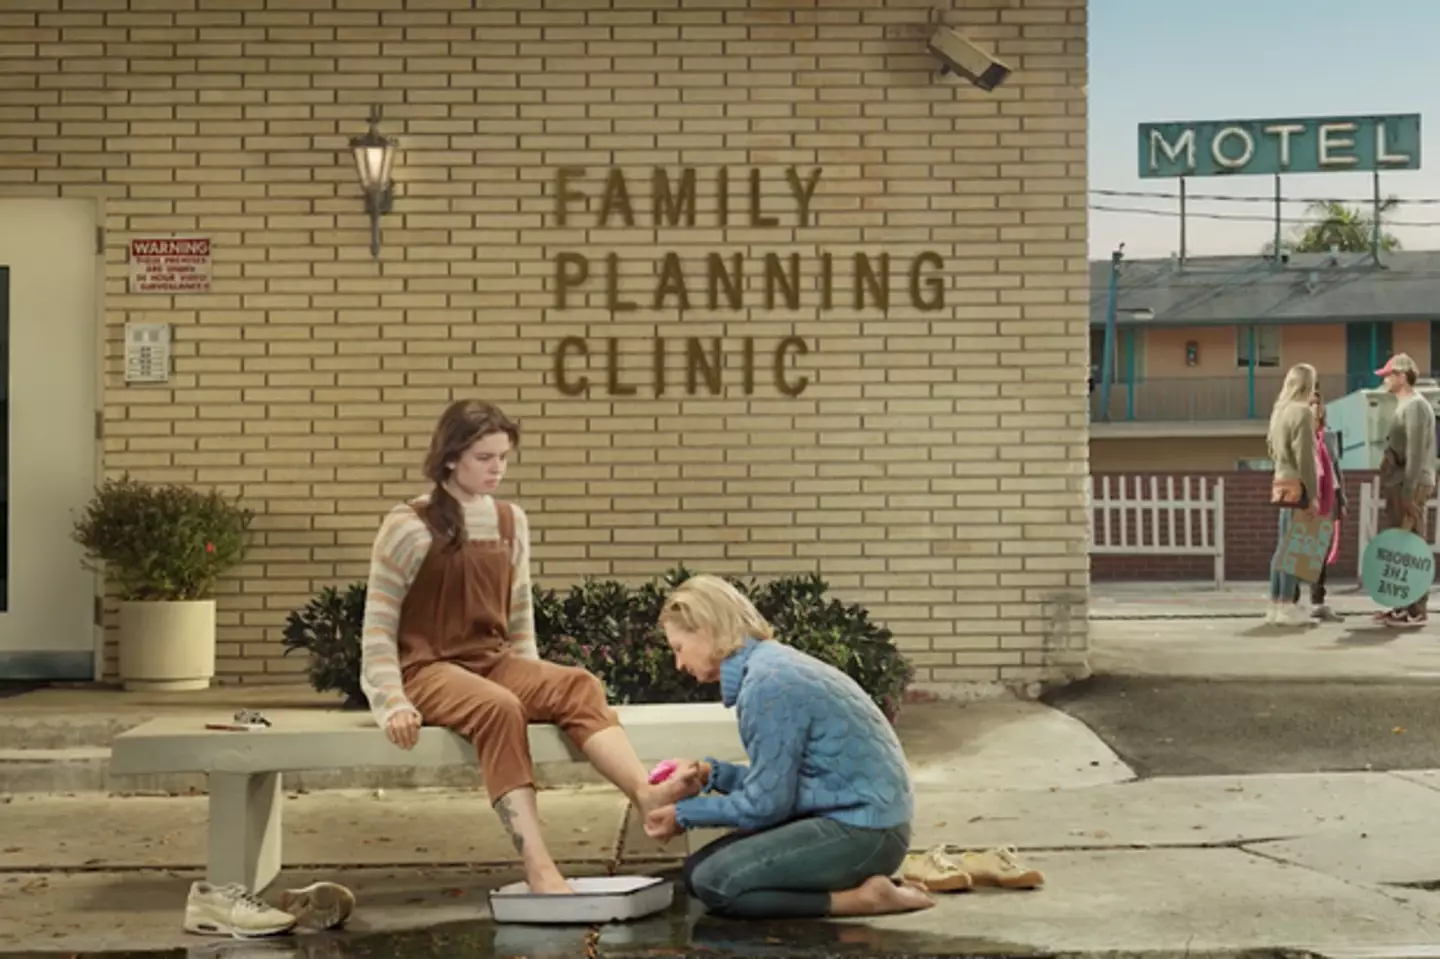 The Jesus-inspired 'Foot Washing' advert aired during the 58th Super Bowl on Sunday.